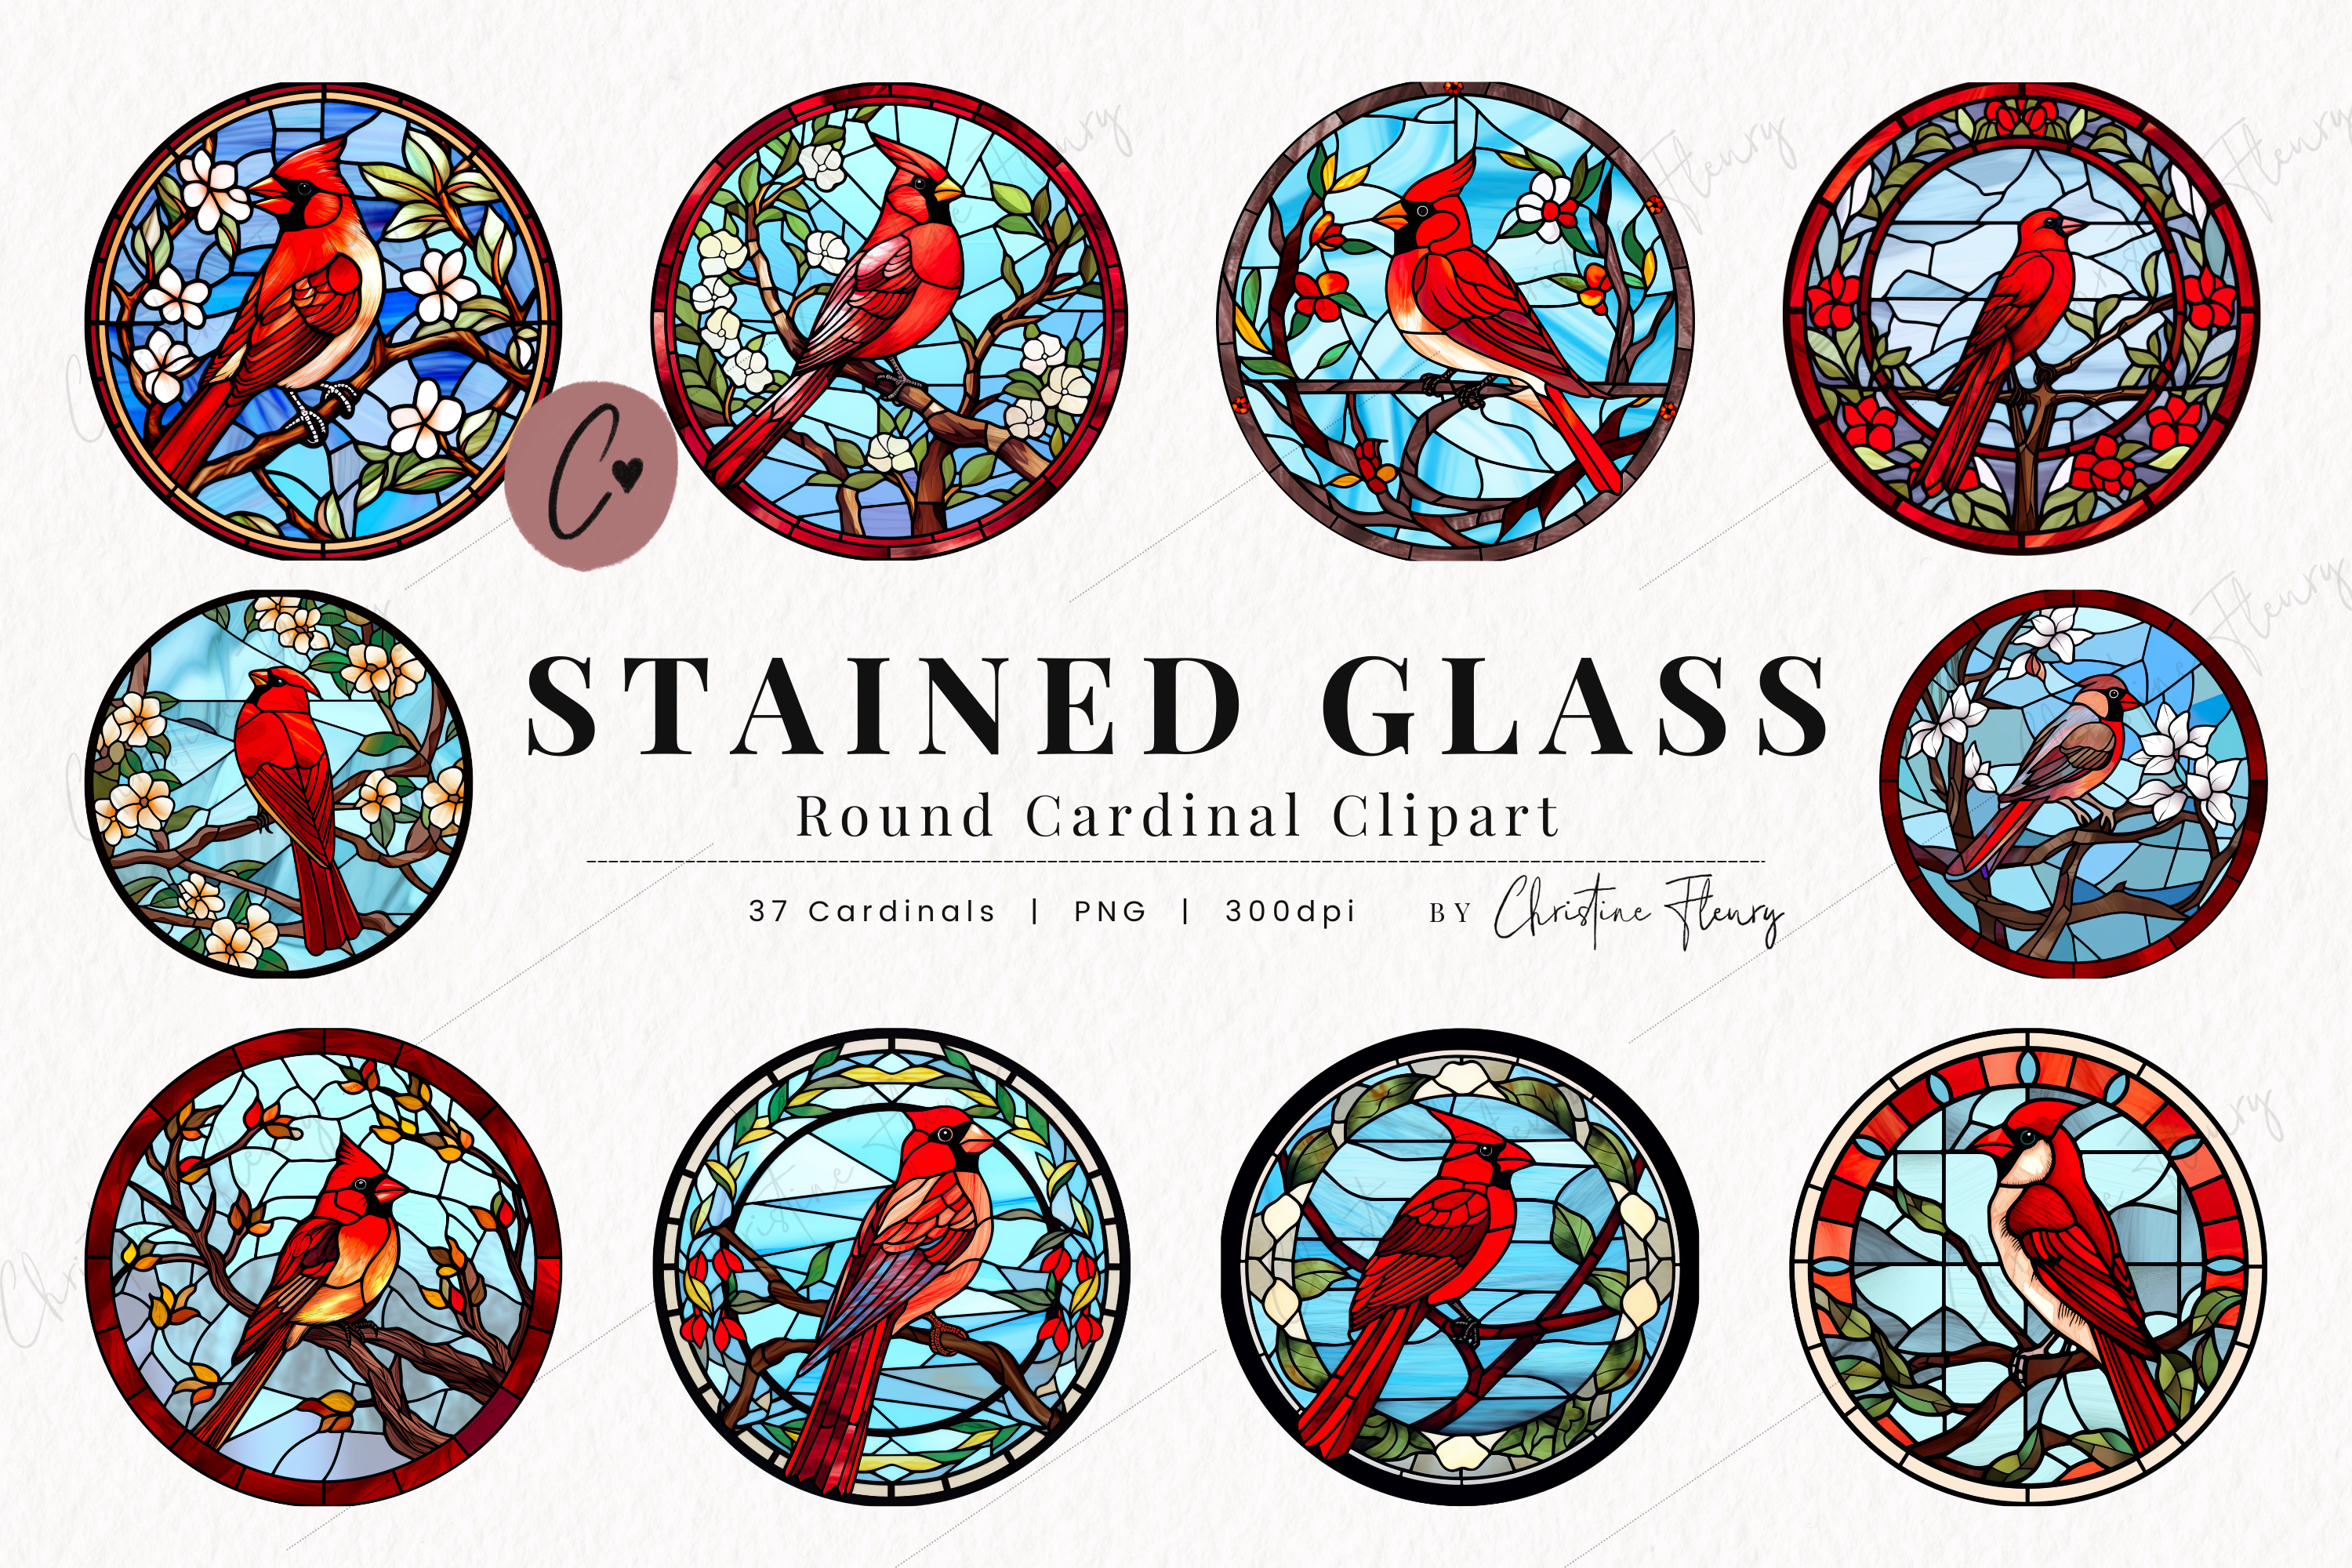 37 Round Cardinal Stained Glass Clipart By Christine Fleury